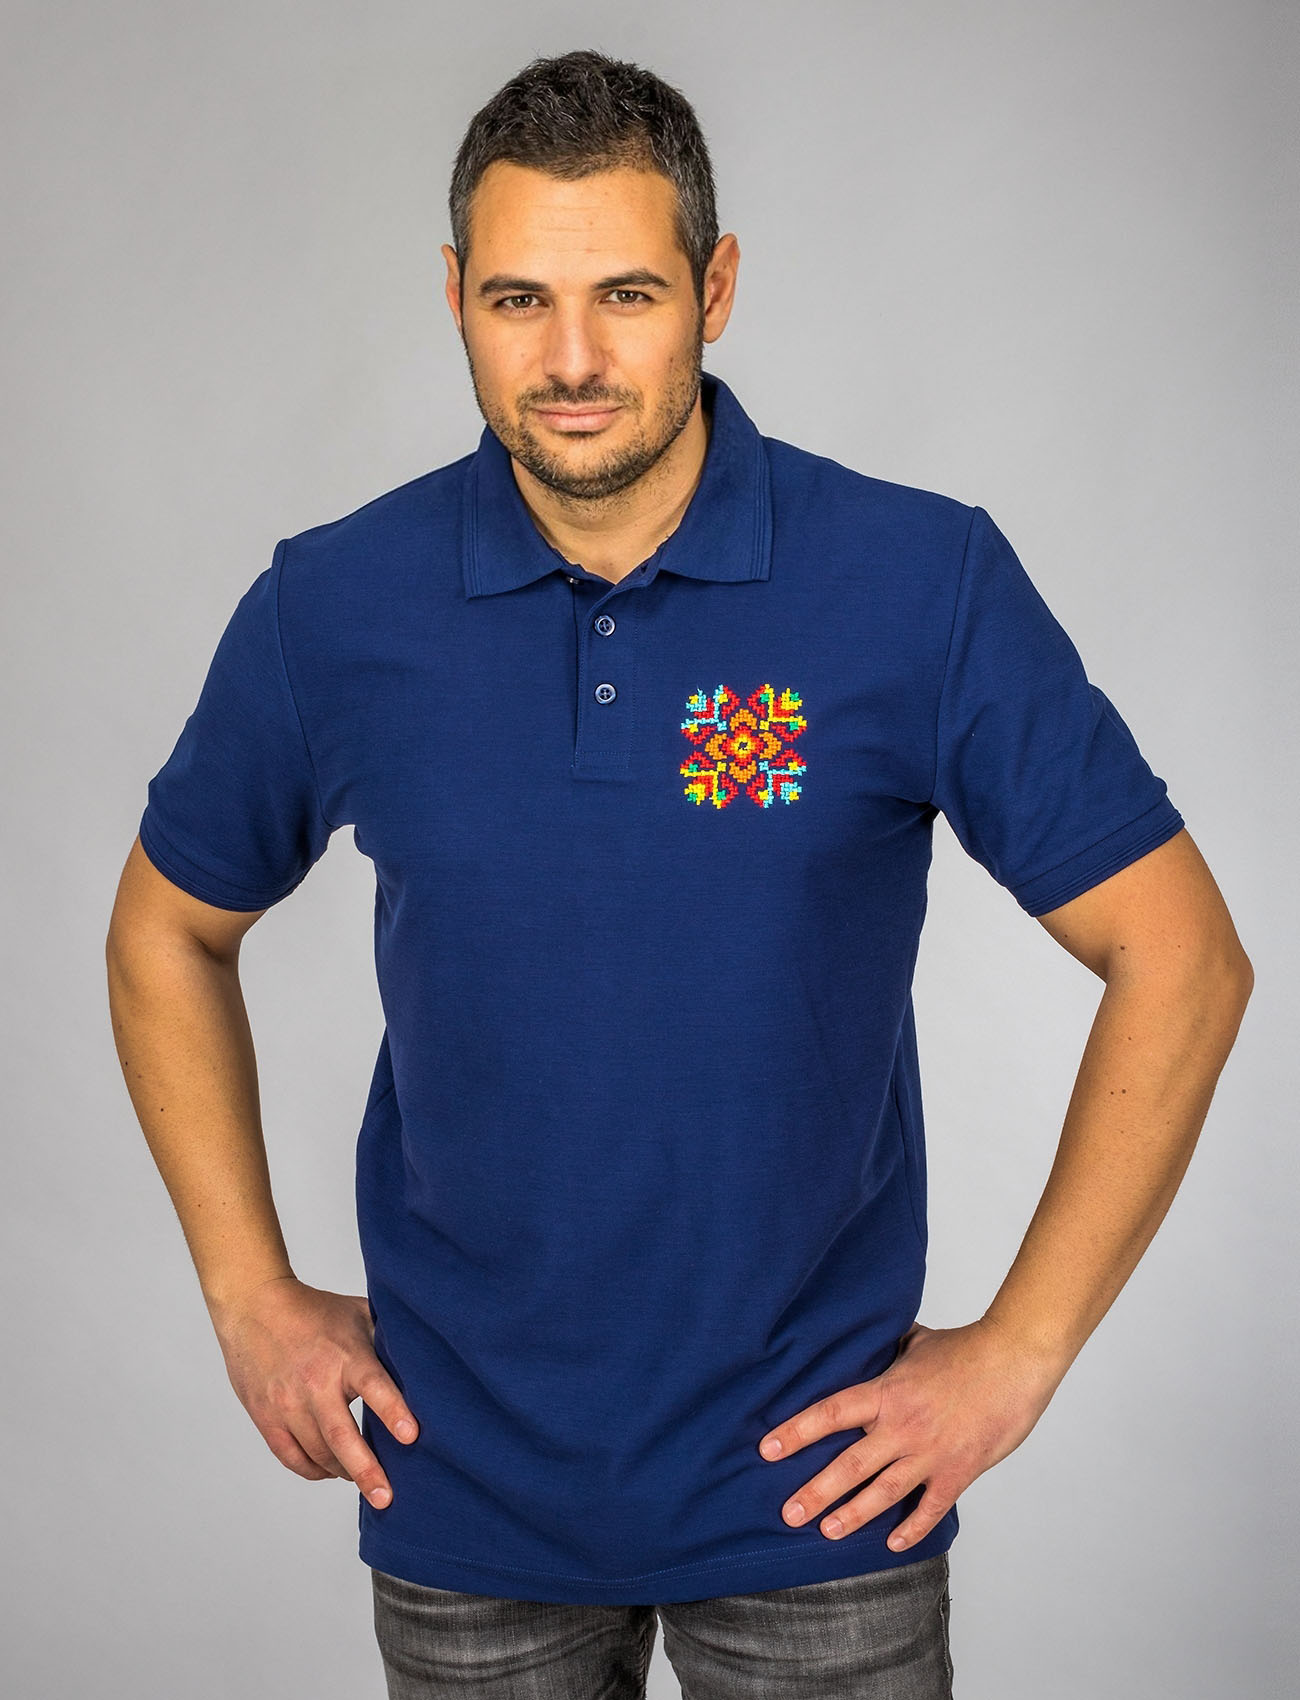 Men's gray polo shirt with embroidery pattern 